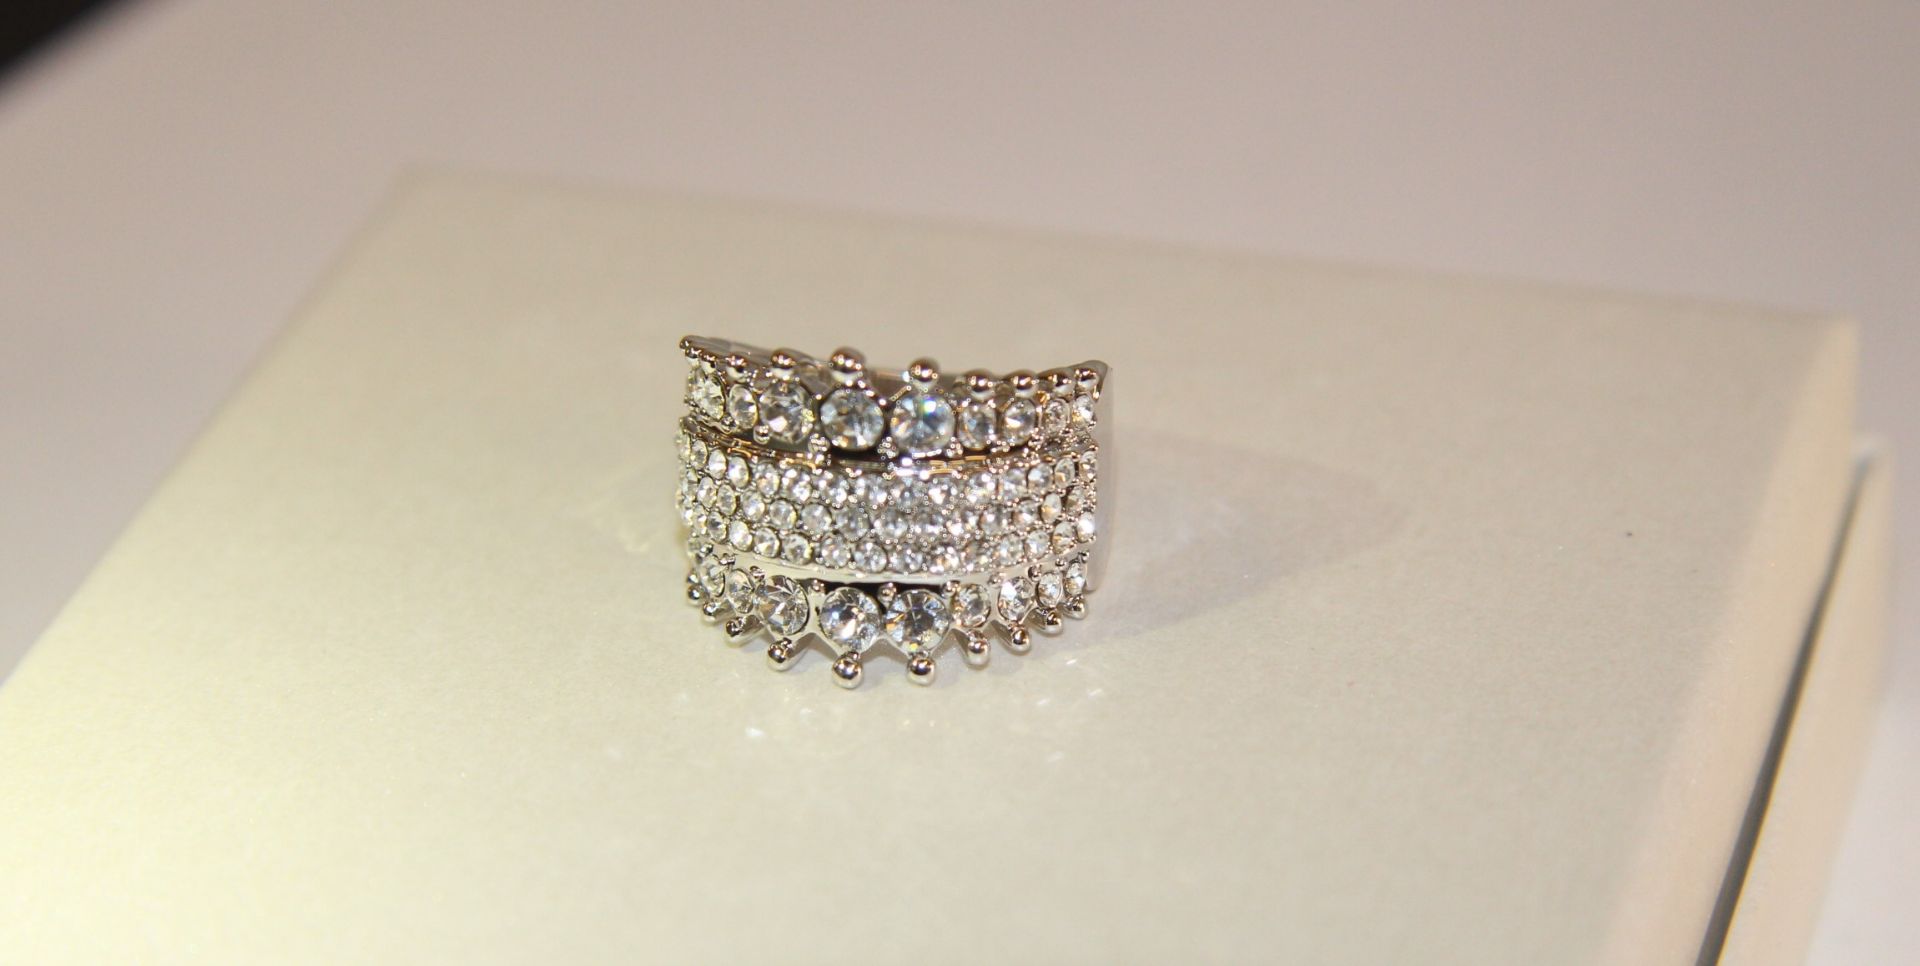 V Brand New Platinum Plated Multi Layer White Stone Ring X 2 YOUR BID PRICE TO BE MULTIPLIED BY TWO